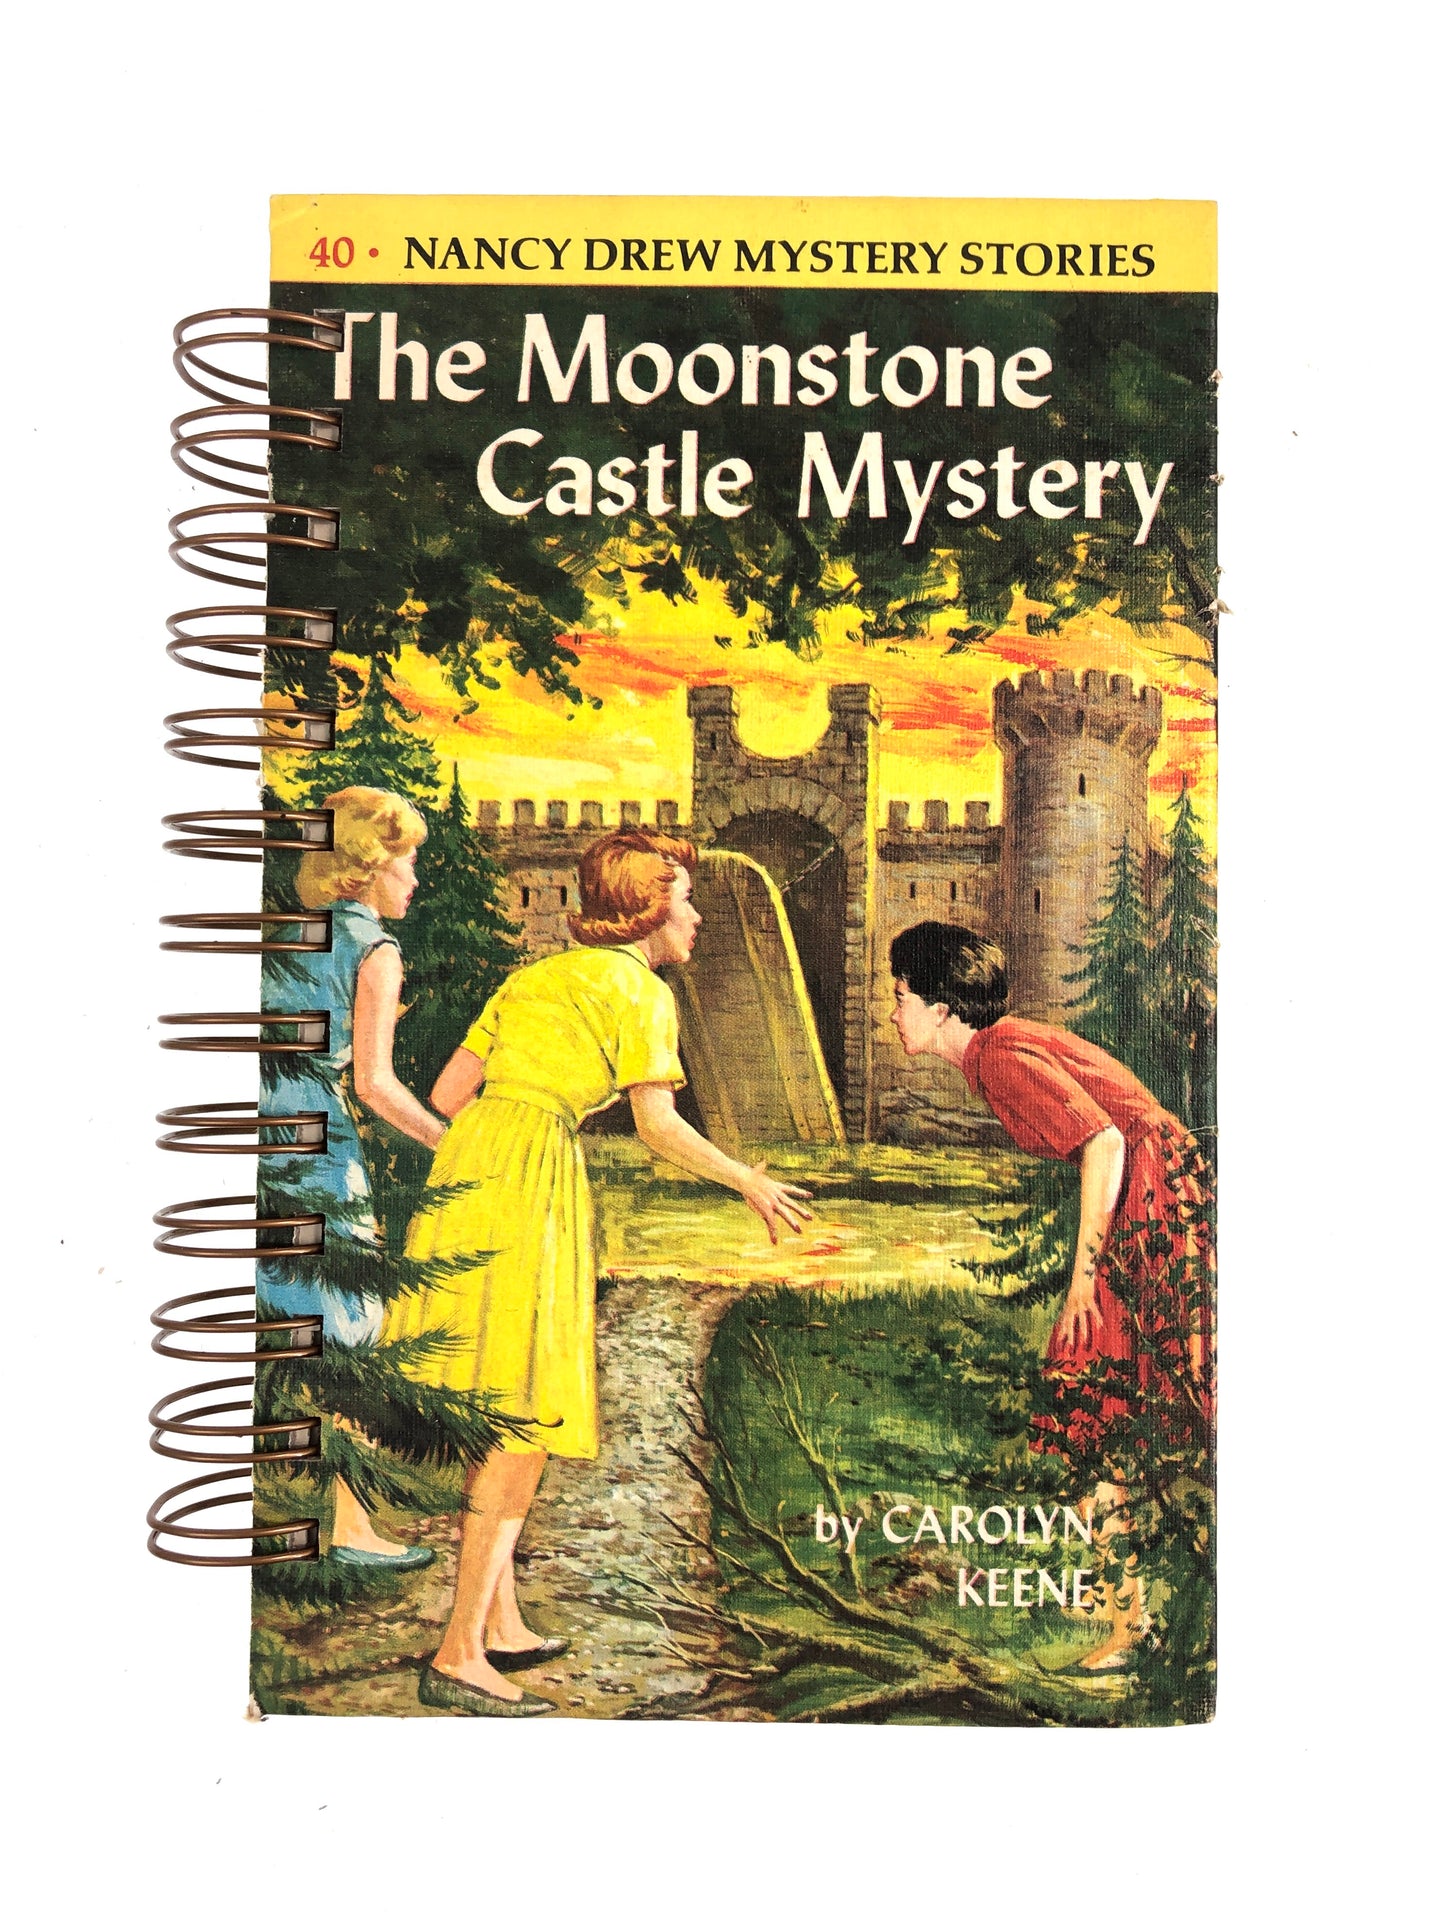 Nancy Drew #40 - The Moonstone Castle Mystery-Red Barn Collections